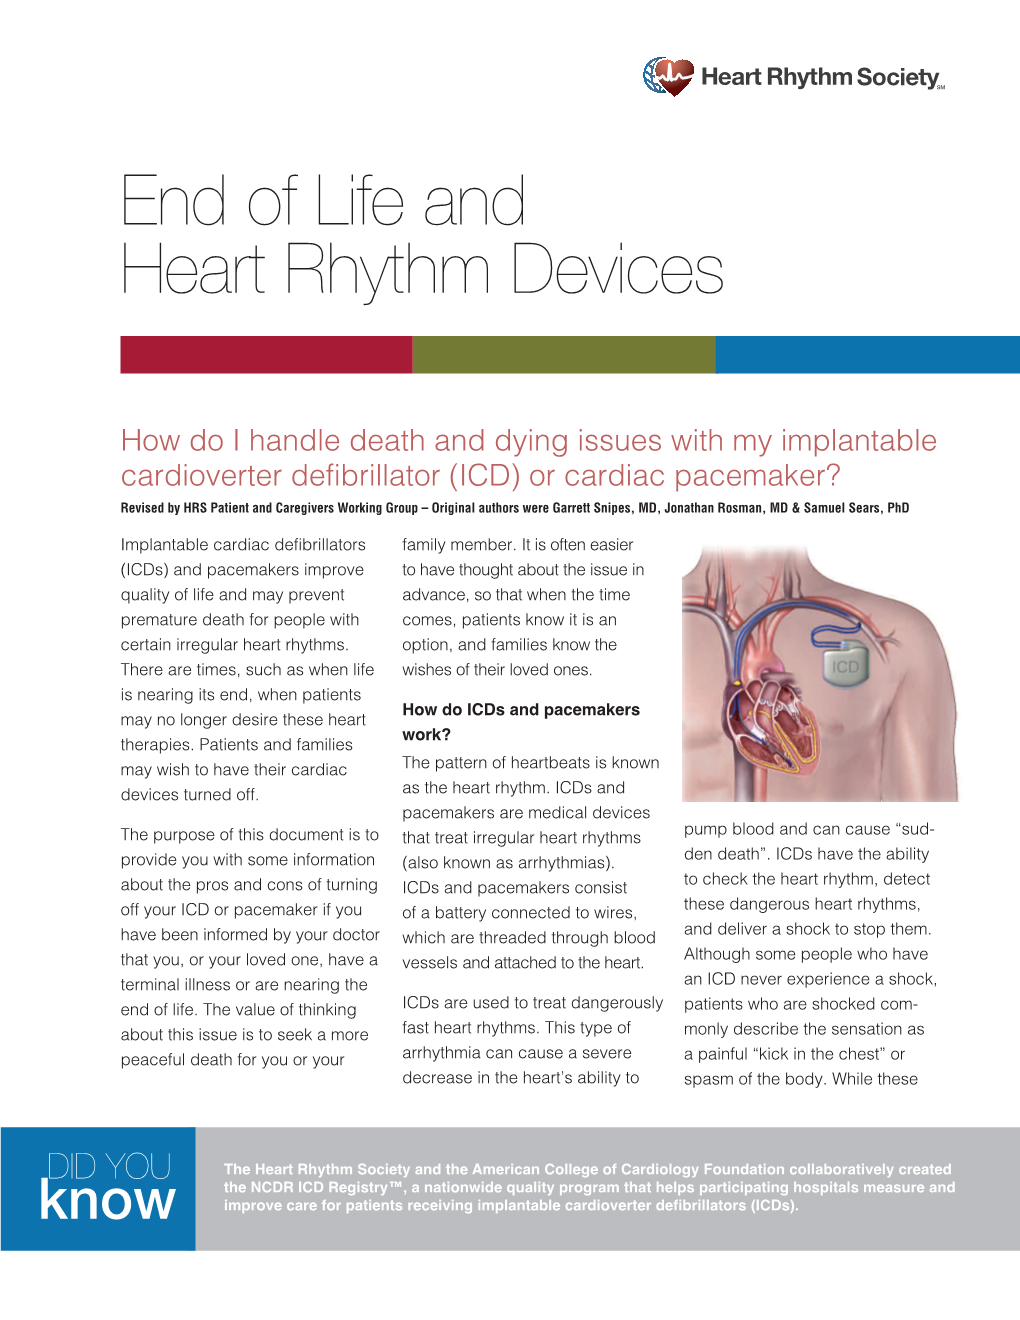 End of Life and Heart Rhythm Devices